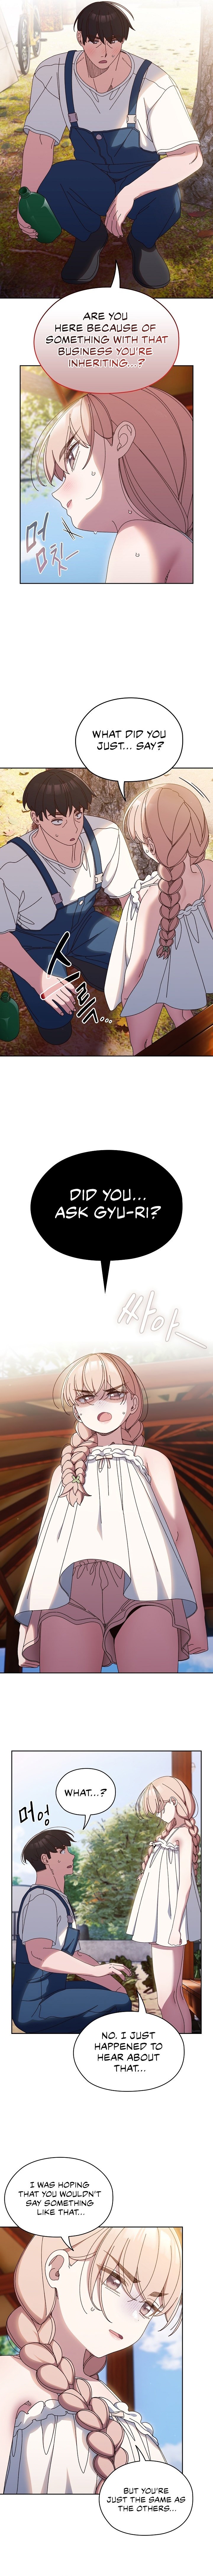 boss-give-me-your-daughter-chap-31-2